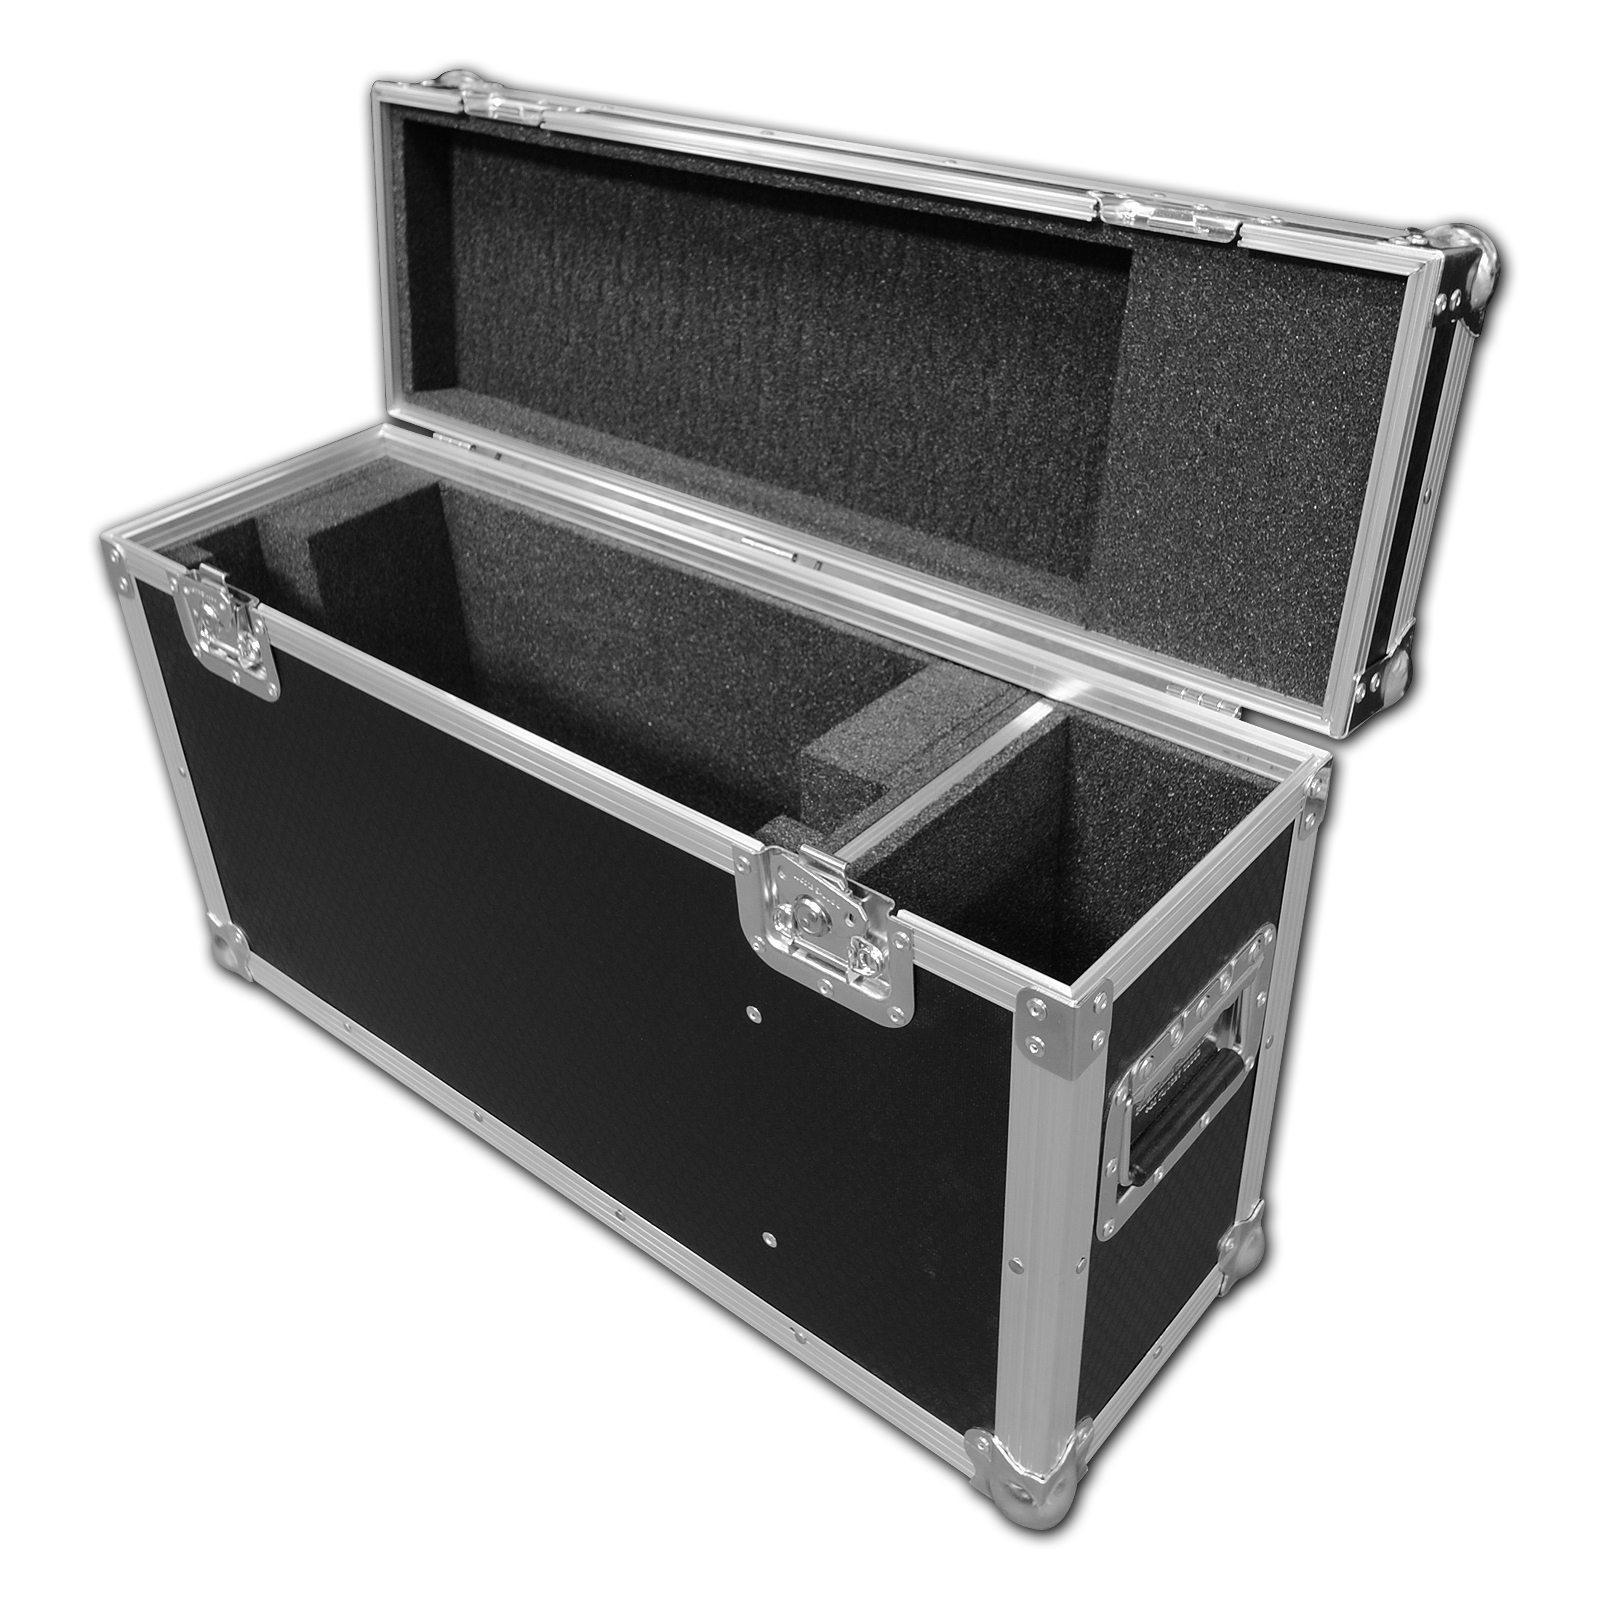 23 TFT Monitor Flight Case for Samsung S23A750DS